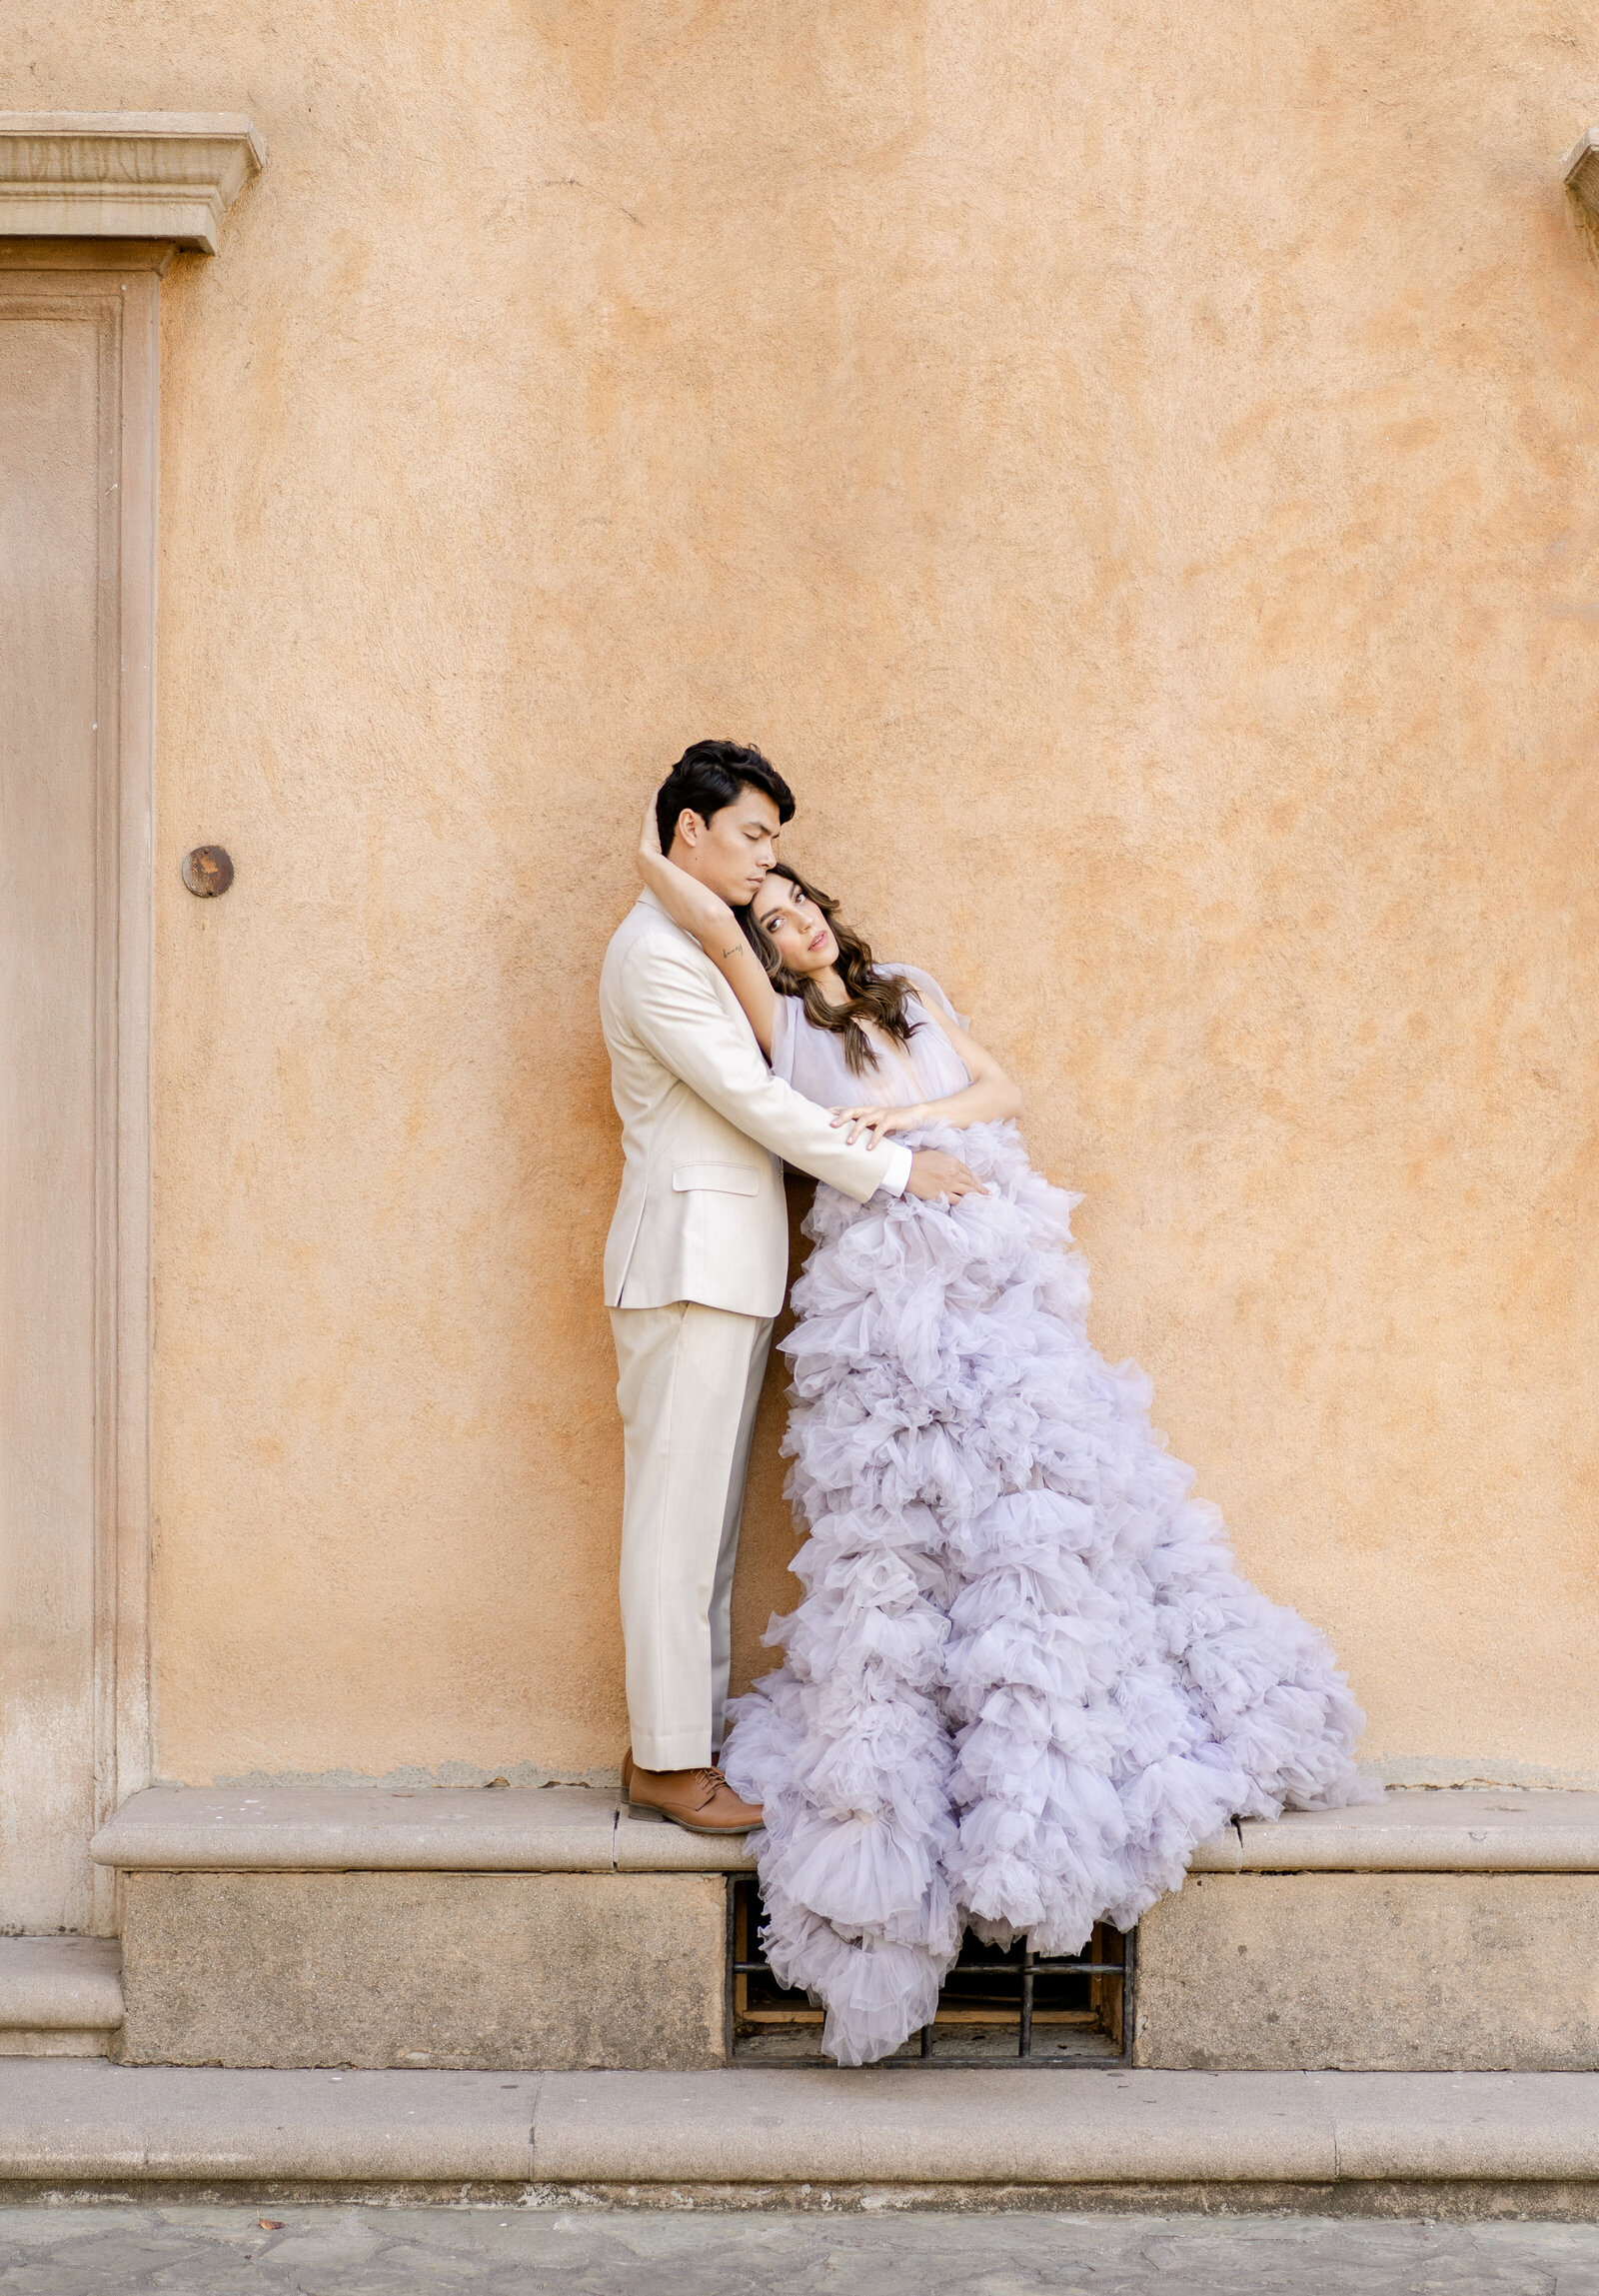 Portrait of a bride in a lavender dress standing with a groom in an ivory suit near a peach-colored building.